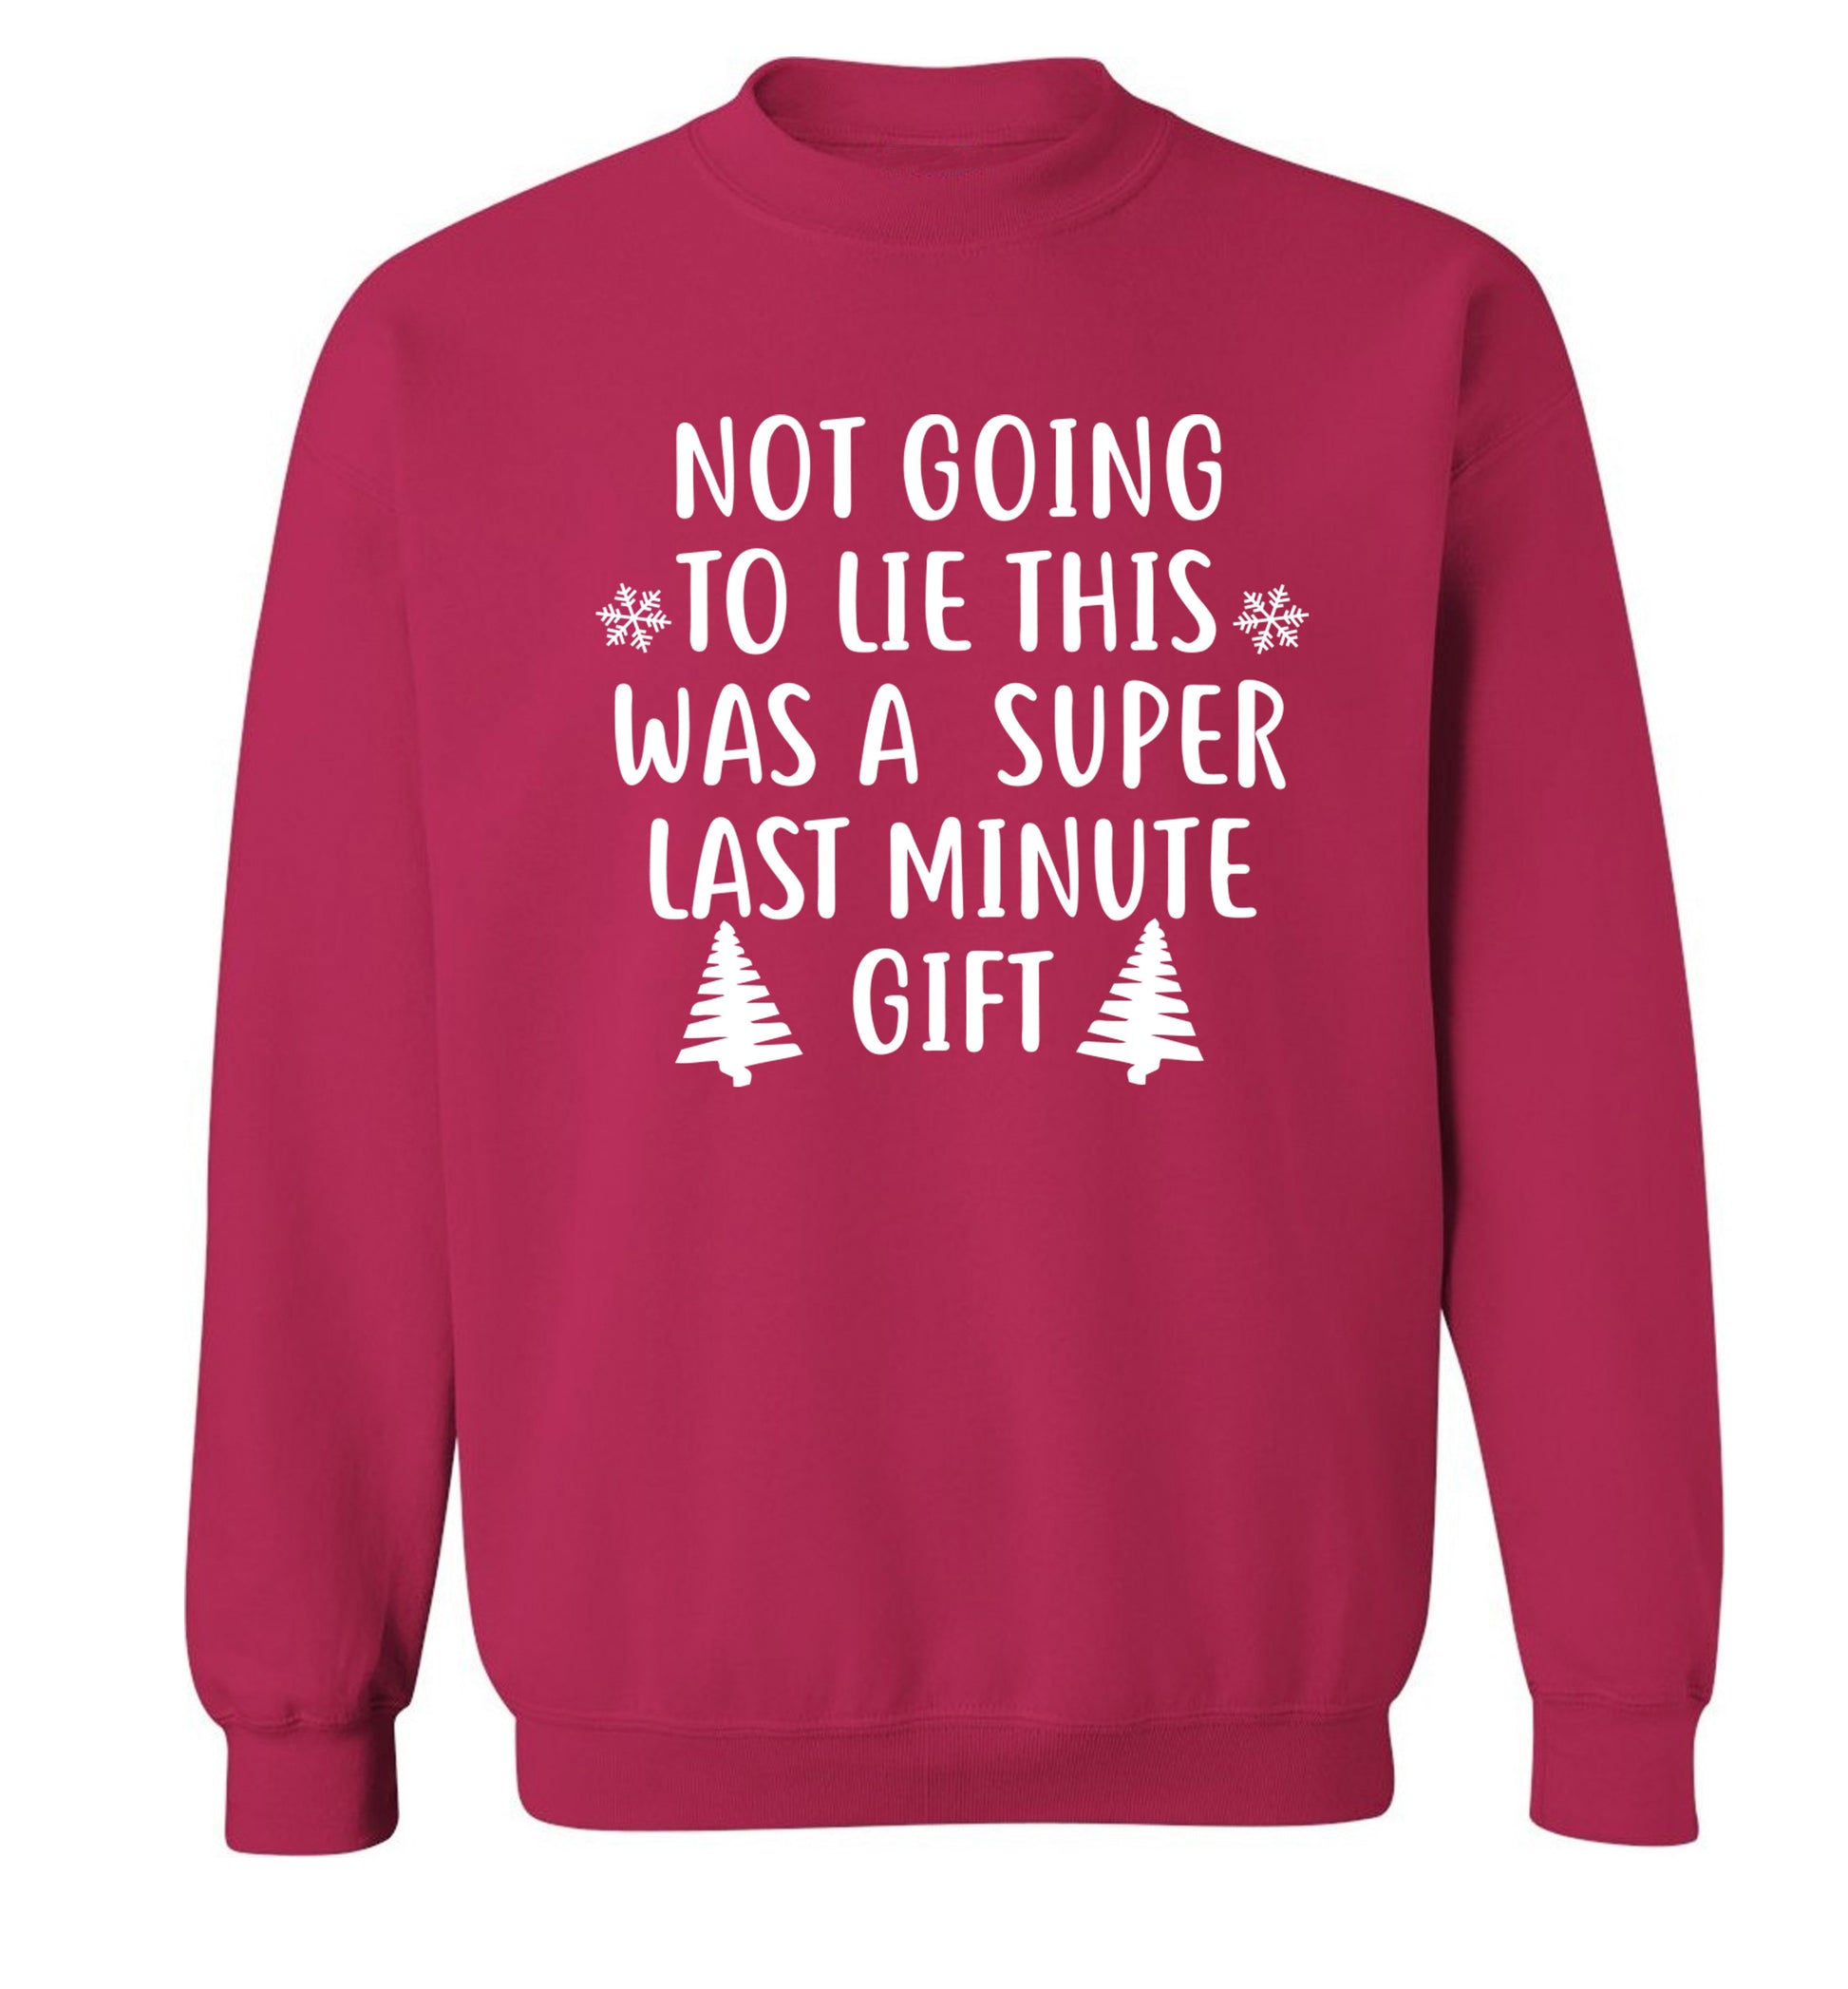 Not going to lie this was a super last minute gift Adult's unisex pink Sweater 2XL